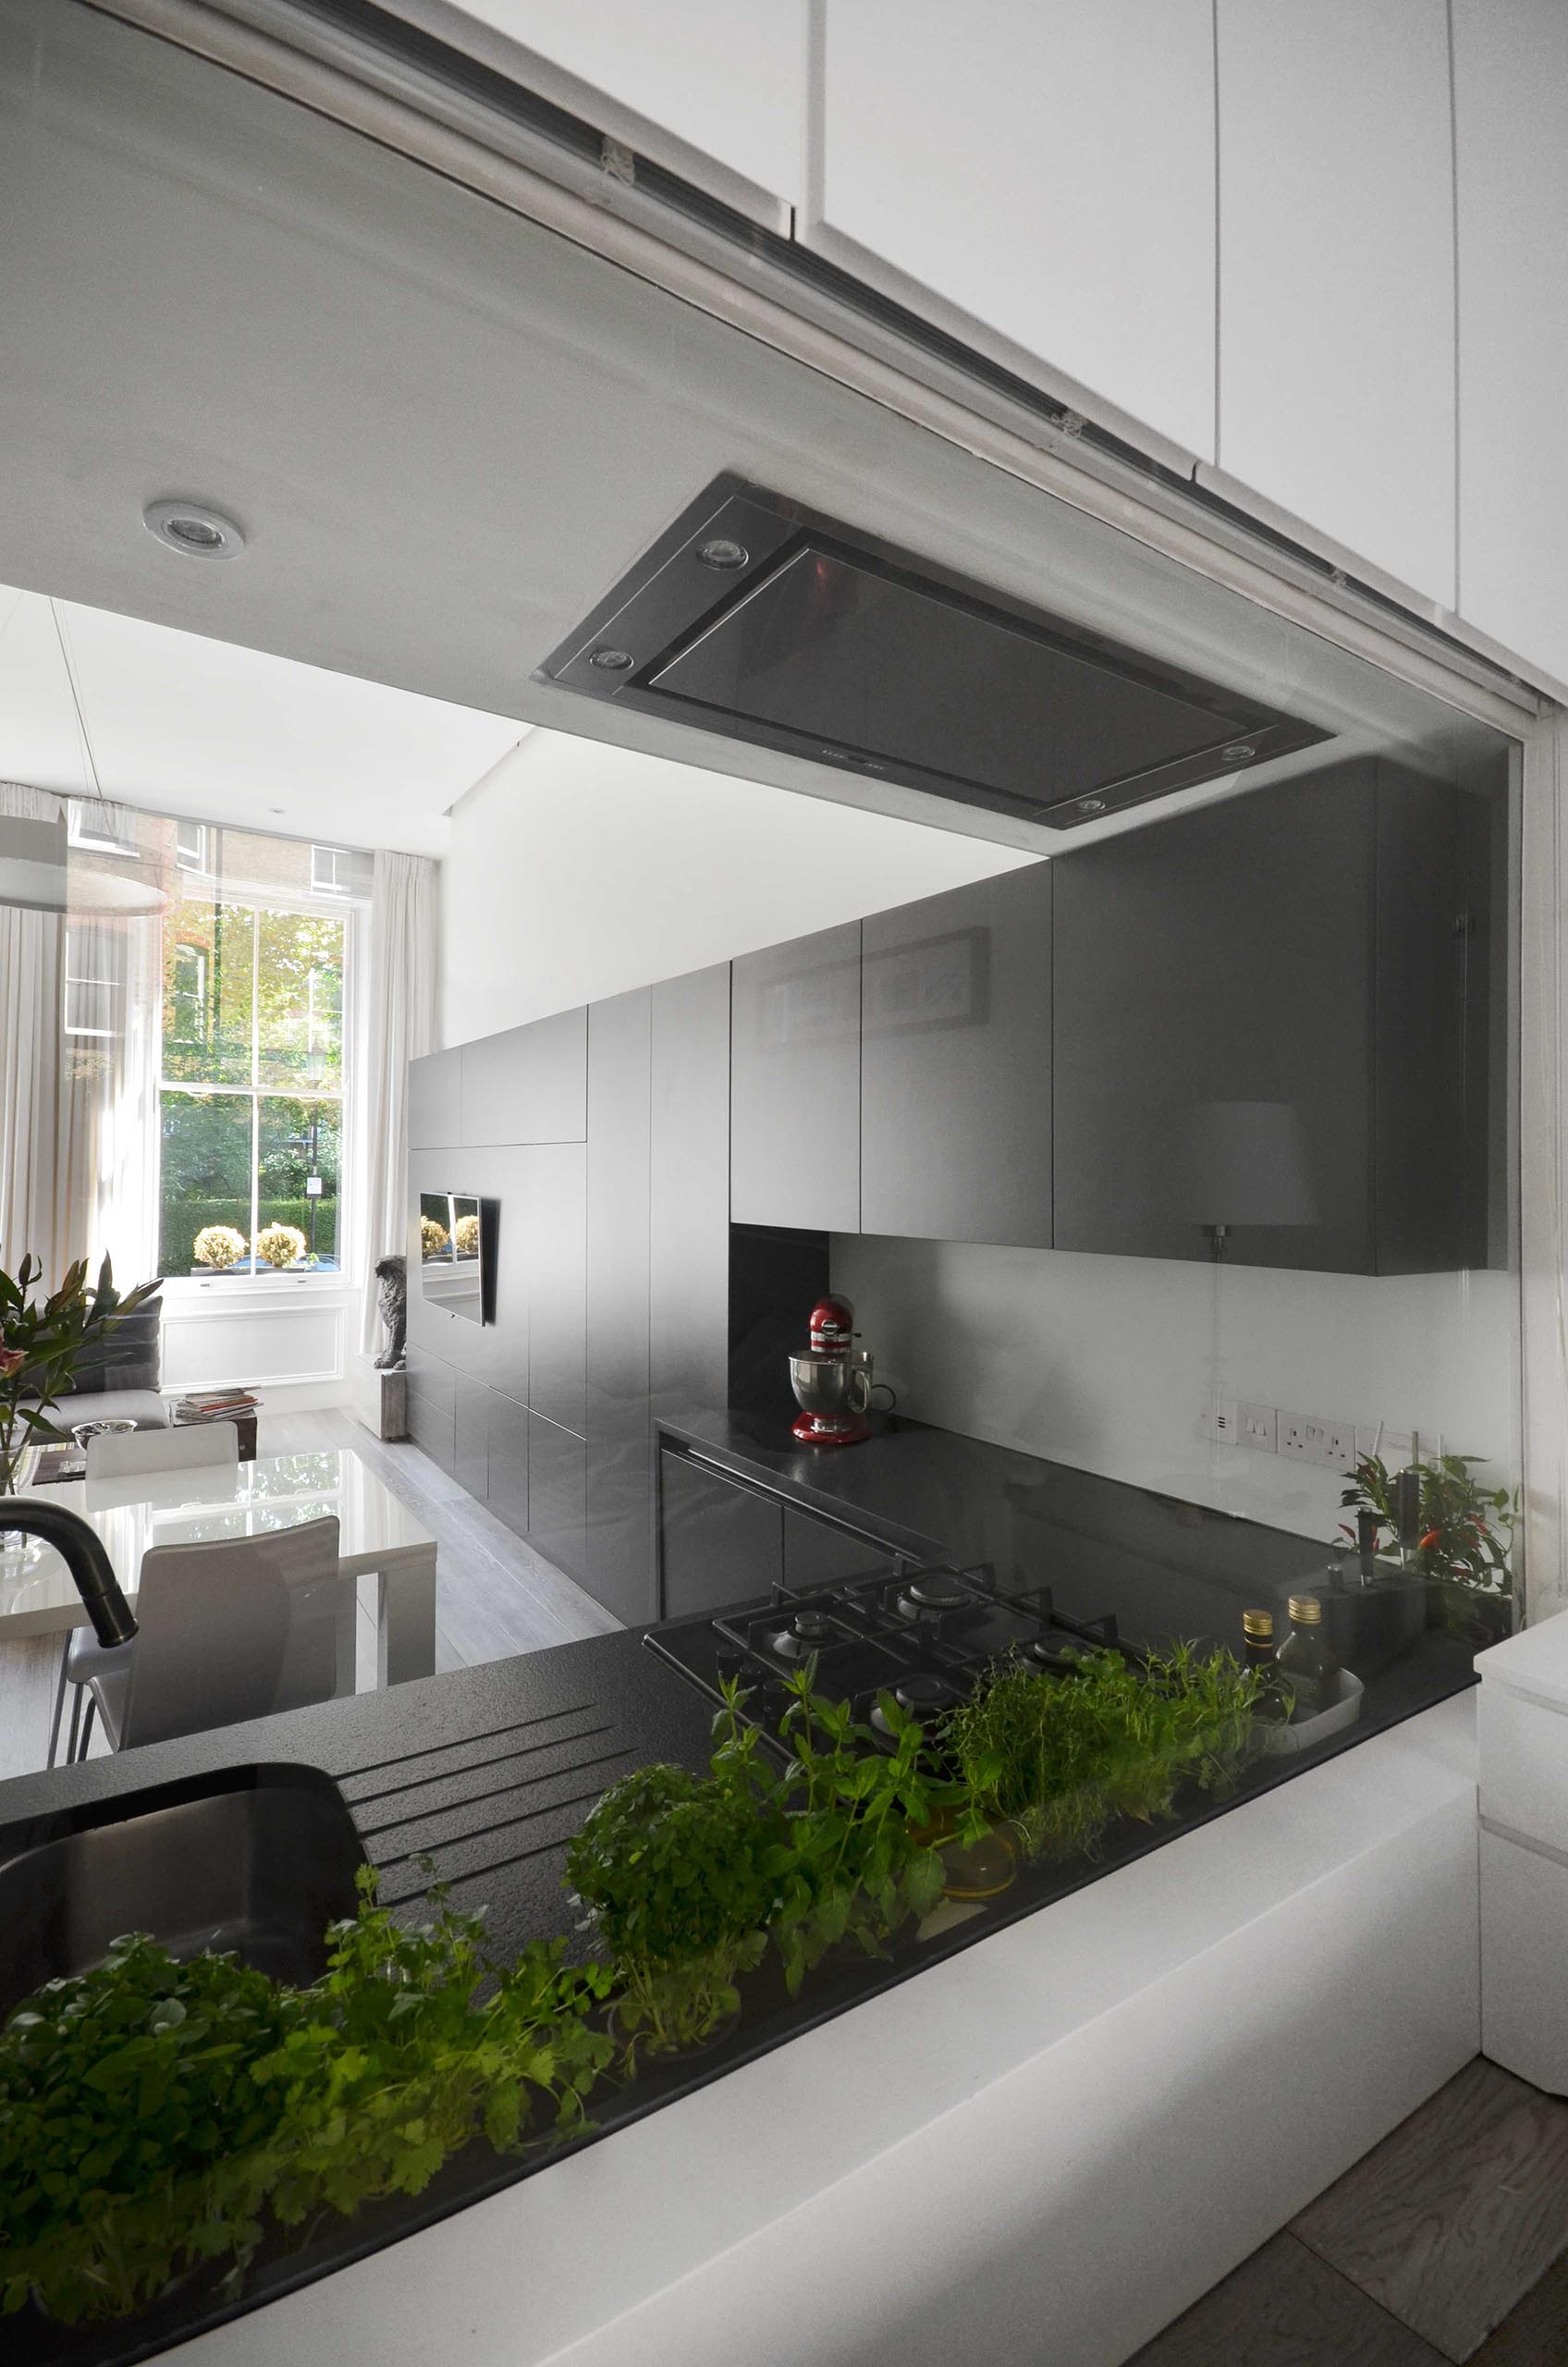 A window that doubles as a backsplash acts as a wall between the matte black kitchen and the bedroom.